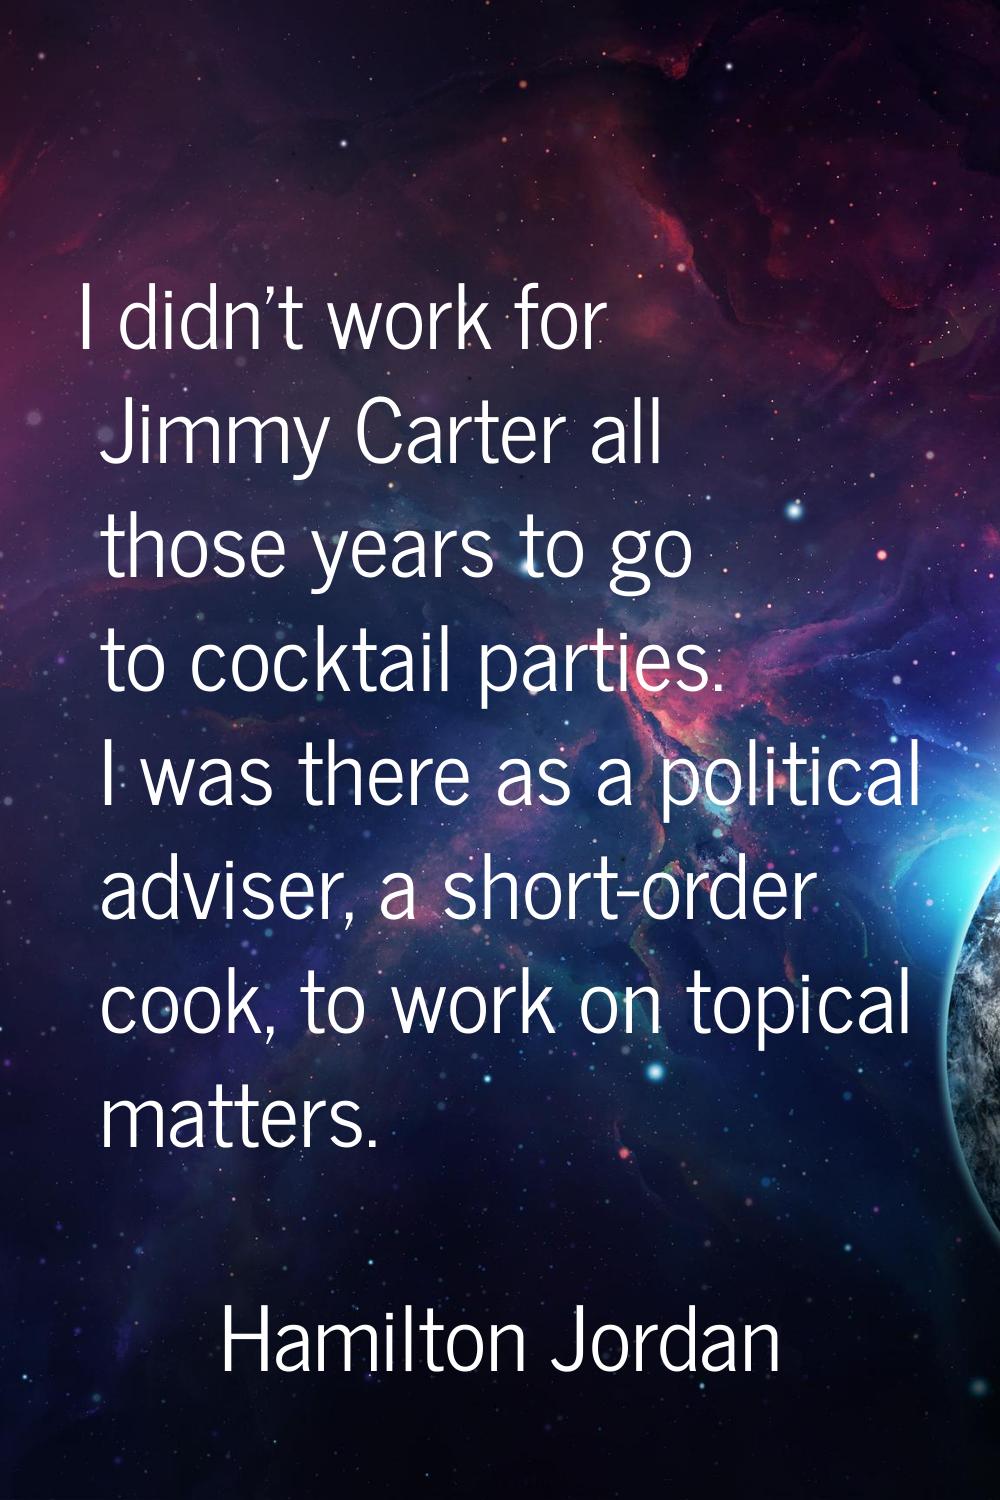 I didn't work for Jimmy Carter all those years to go to cocktail parties. I was there as a politica